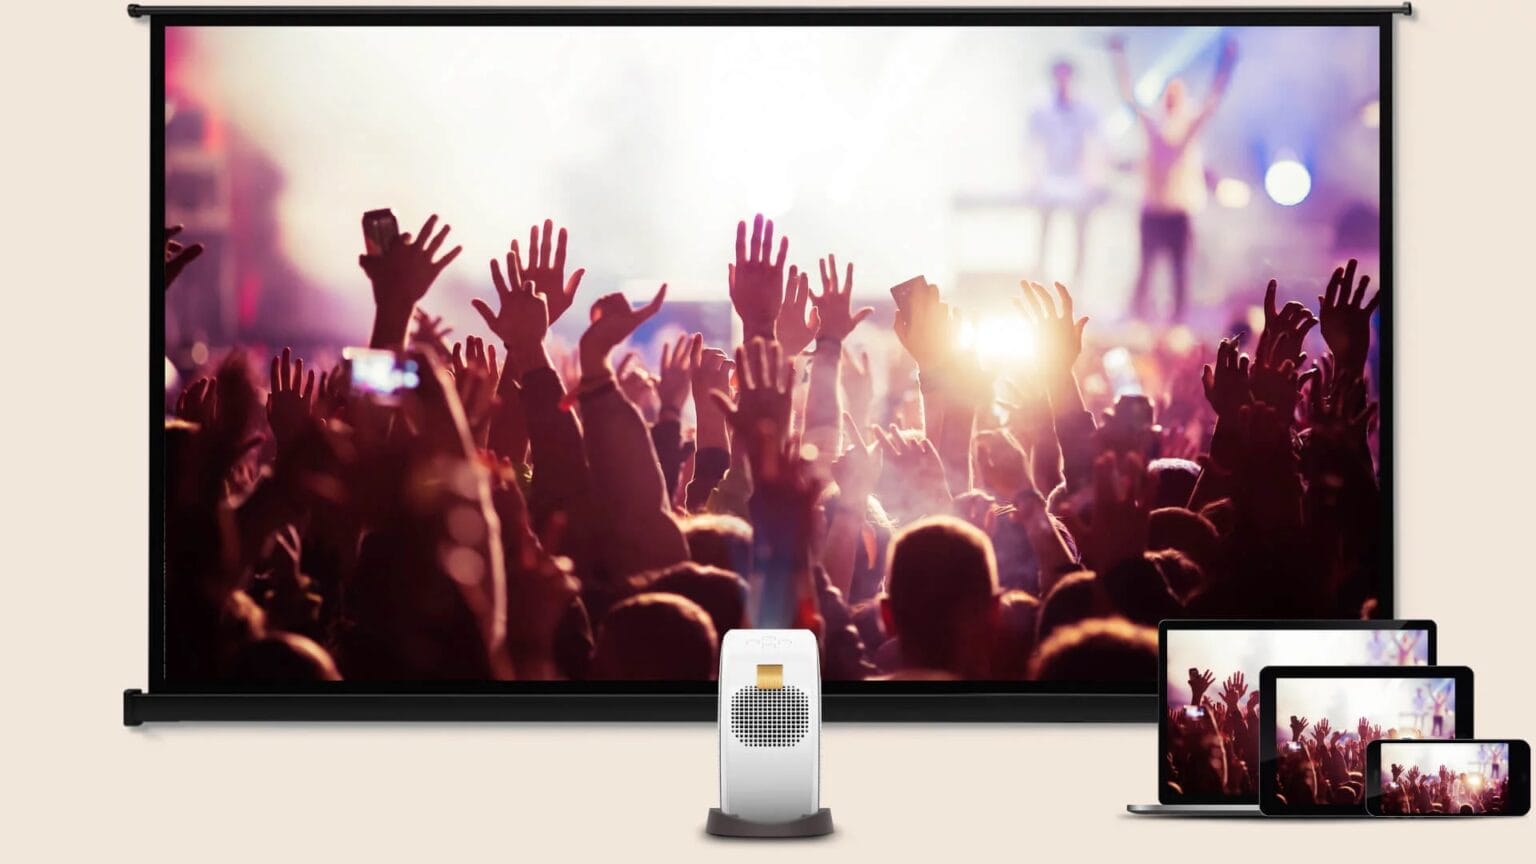 With this projector, you can use AirPlay or ChromeCast to project a big screen almost anywhere.